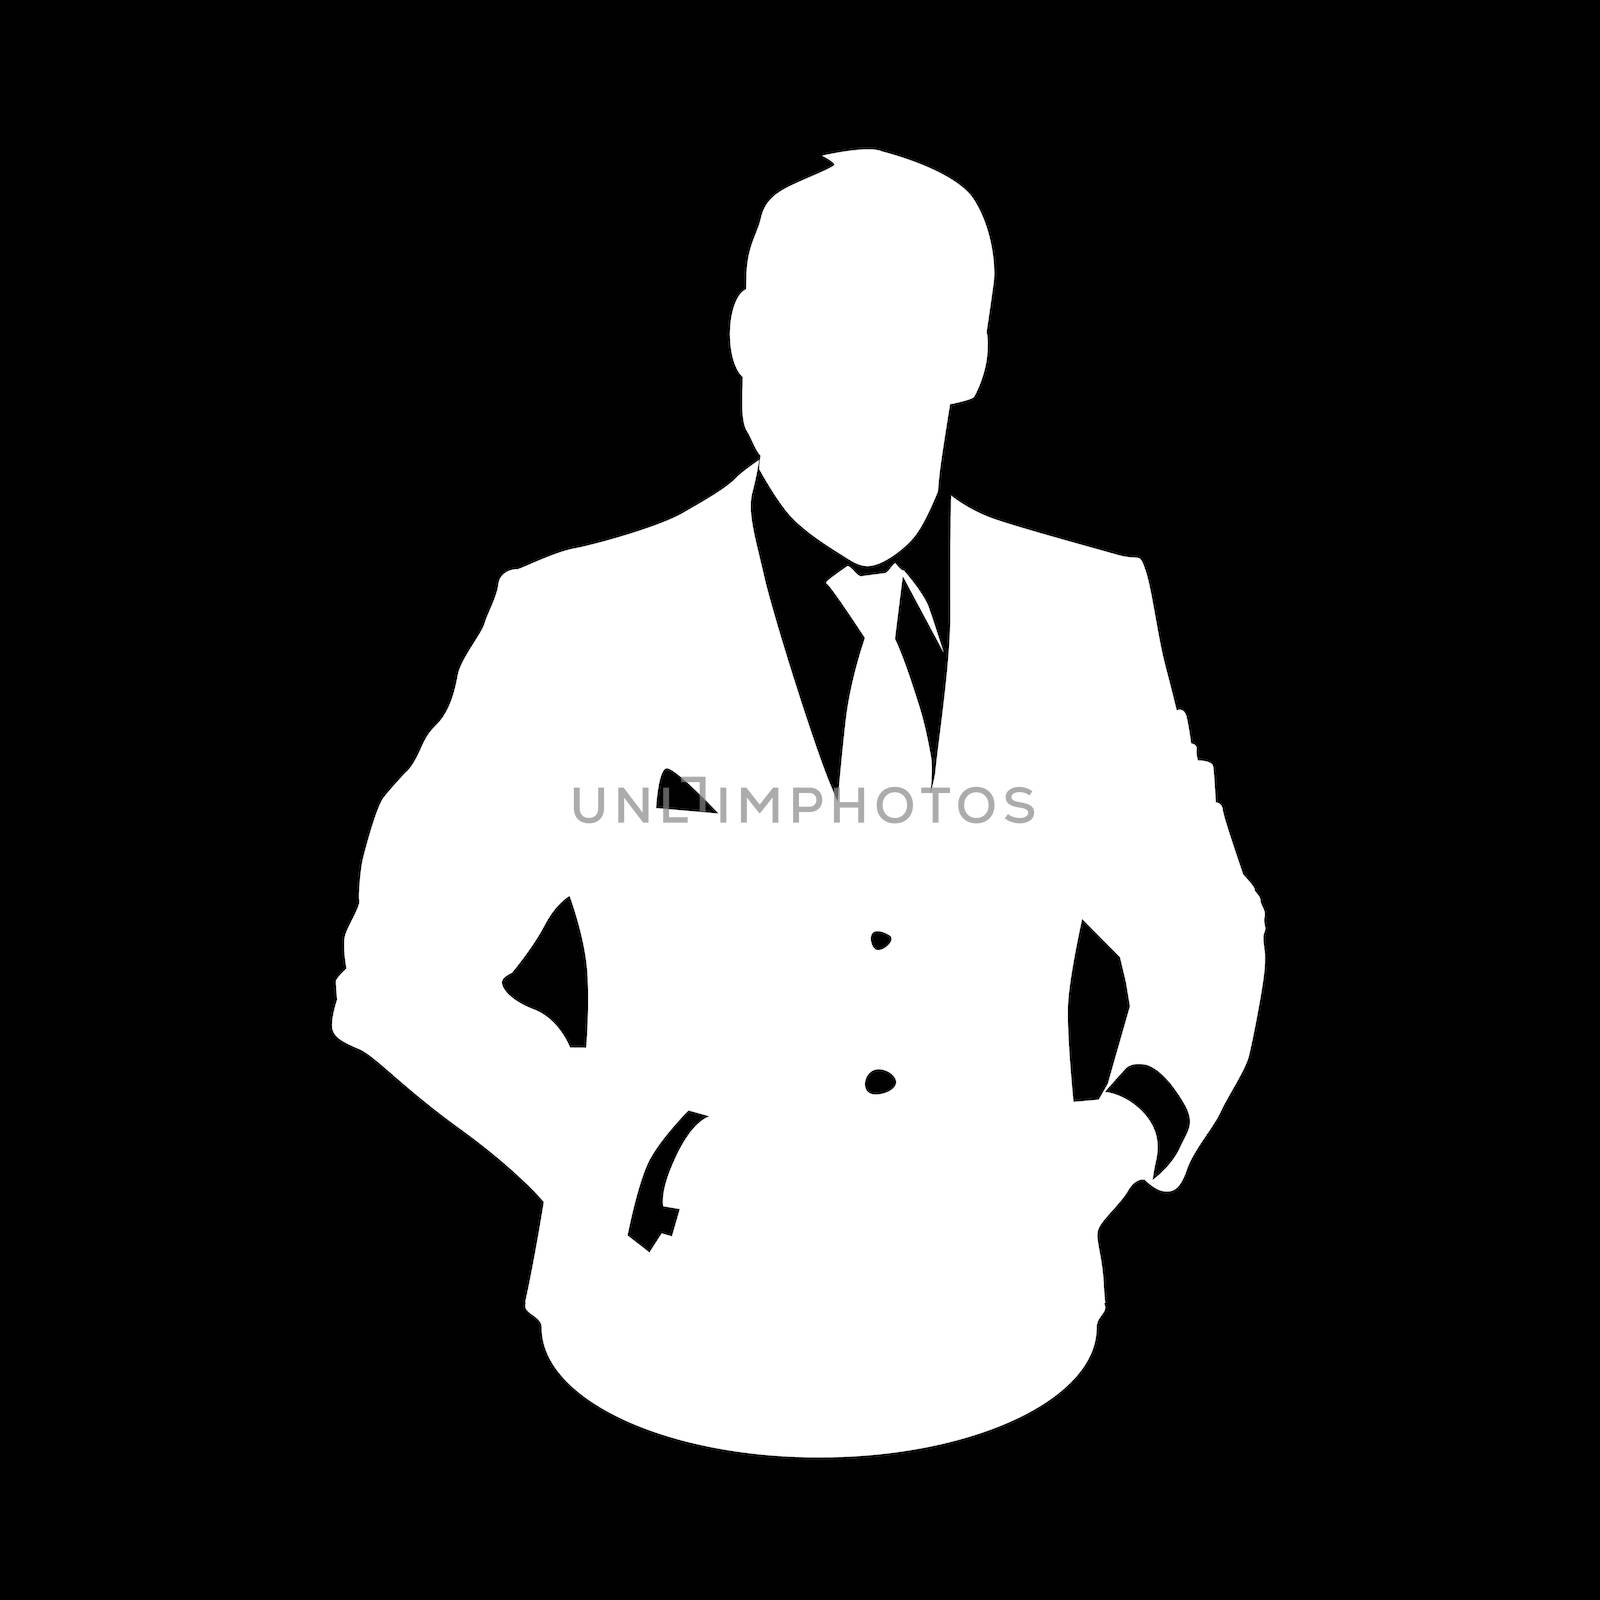 Graphic illustration of a man in business suit as user icon, stencil avatar